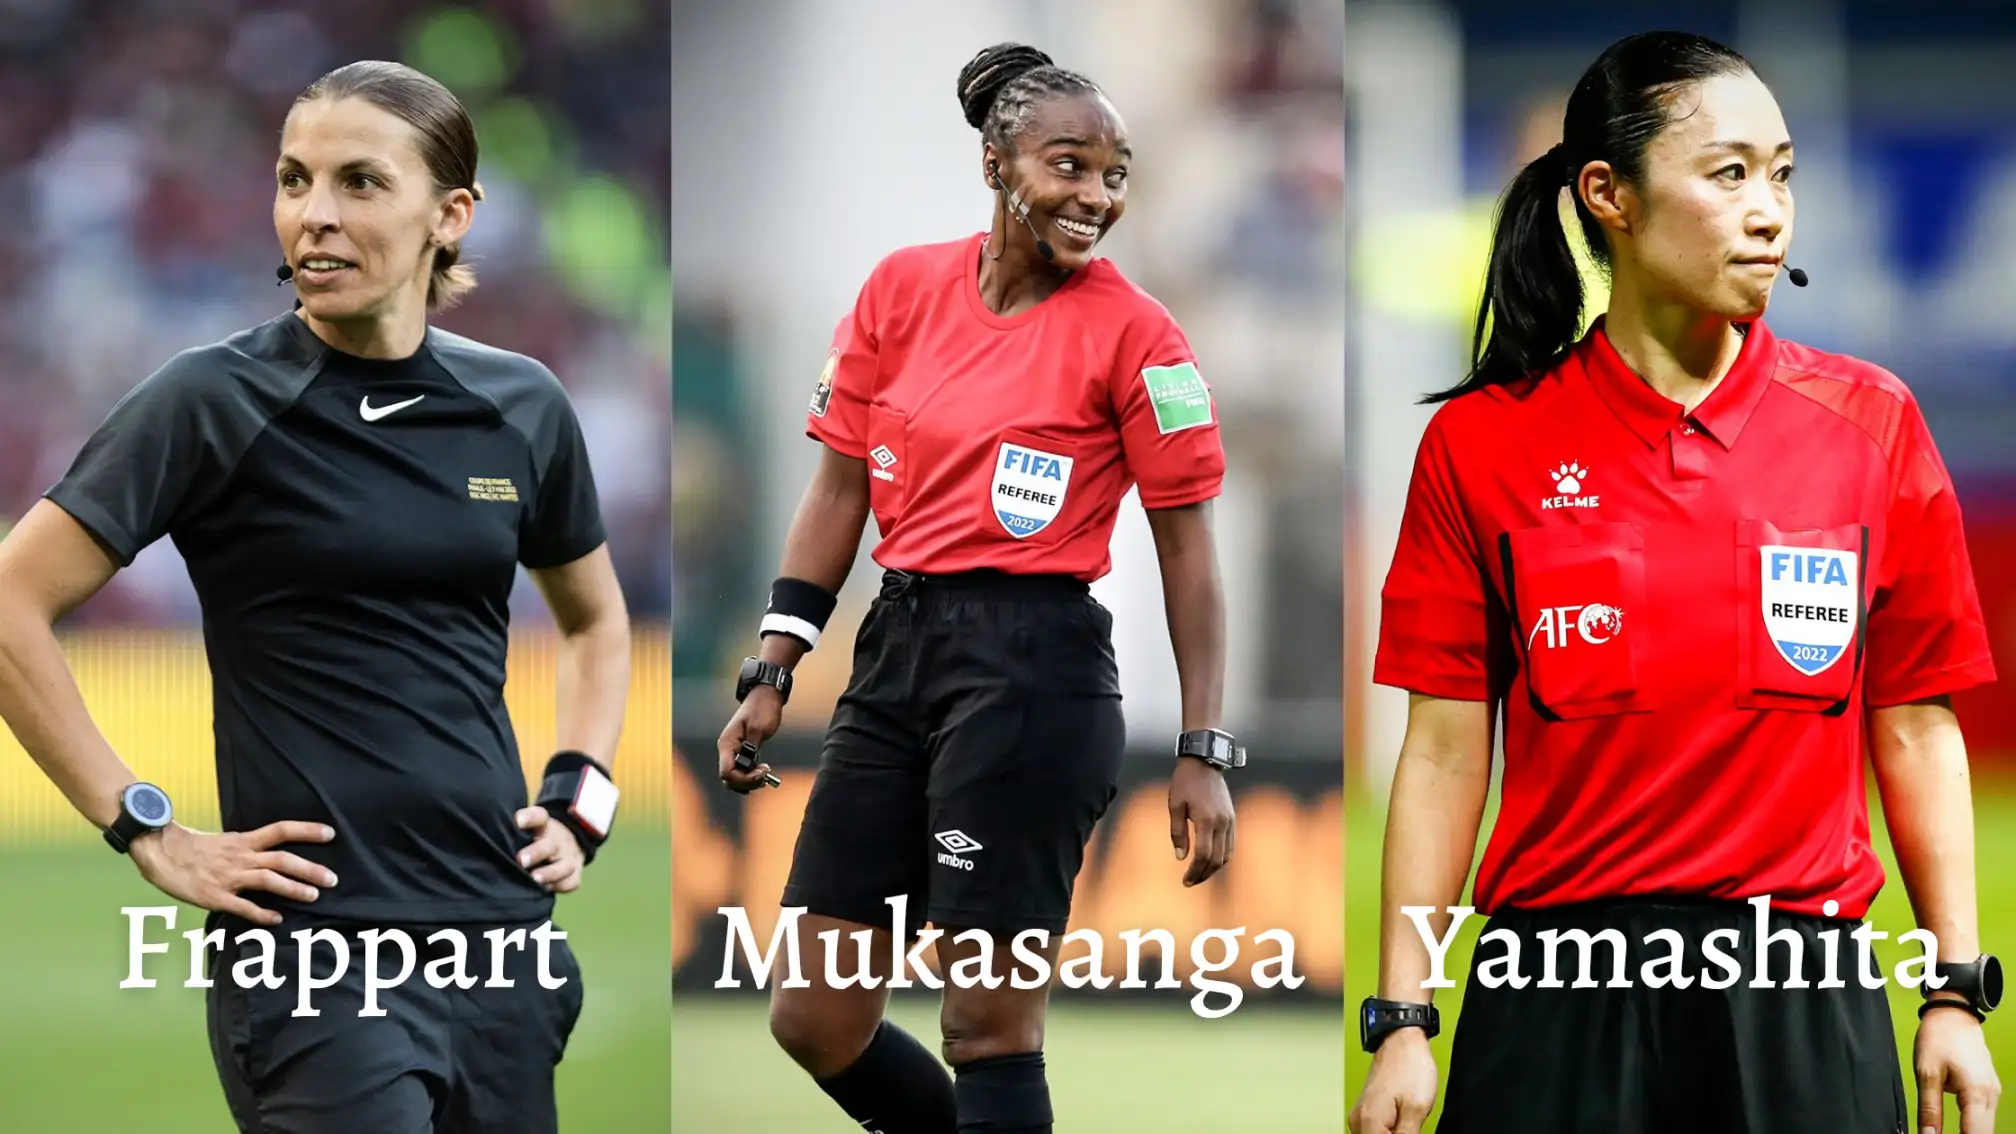 History made: FIFA names three female referees to officiate men's World Cup